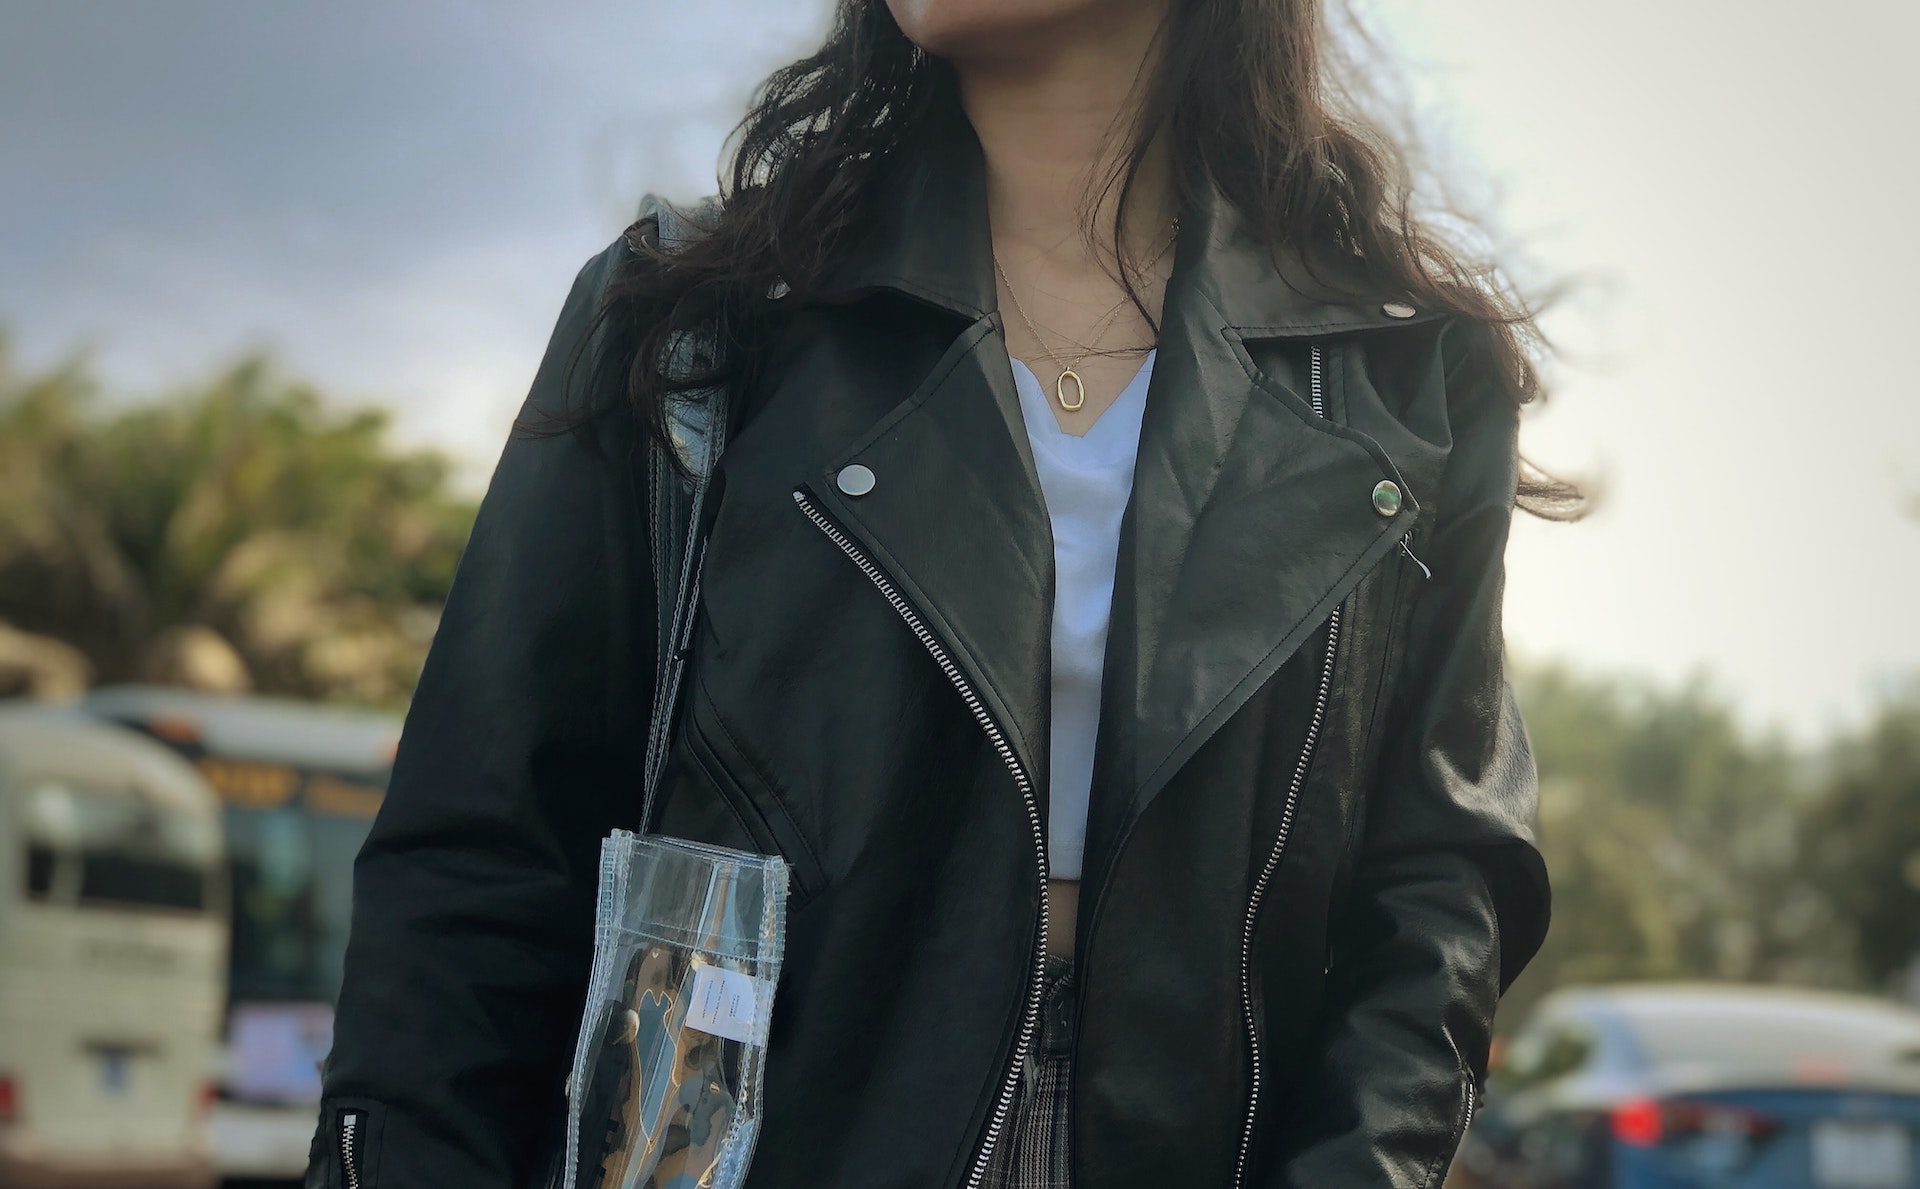 girl wearing leather jacket, which may not be sustainable